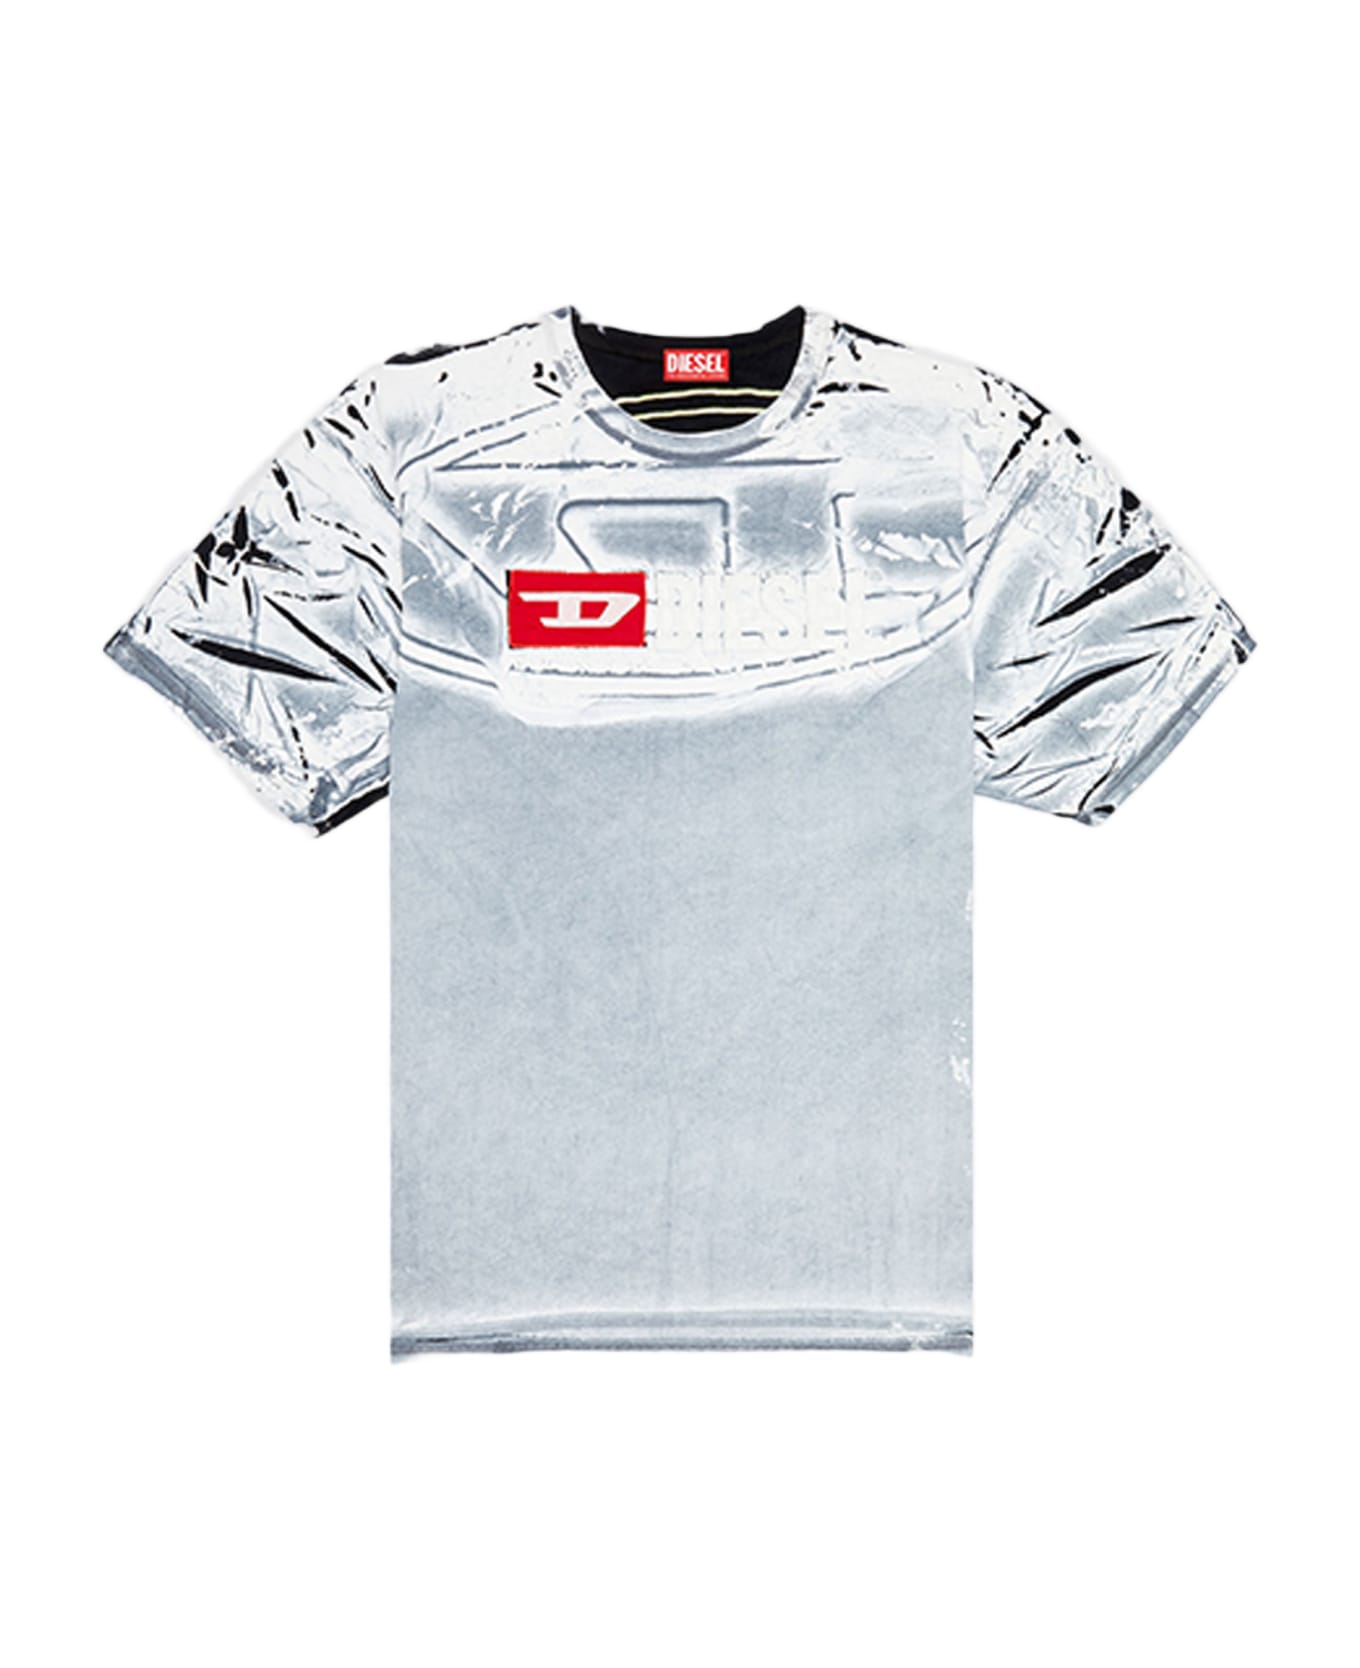 Diesel T-ox White t-shirt with coating and double front logo print - T Ox - Bianco/nero